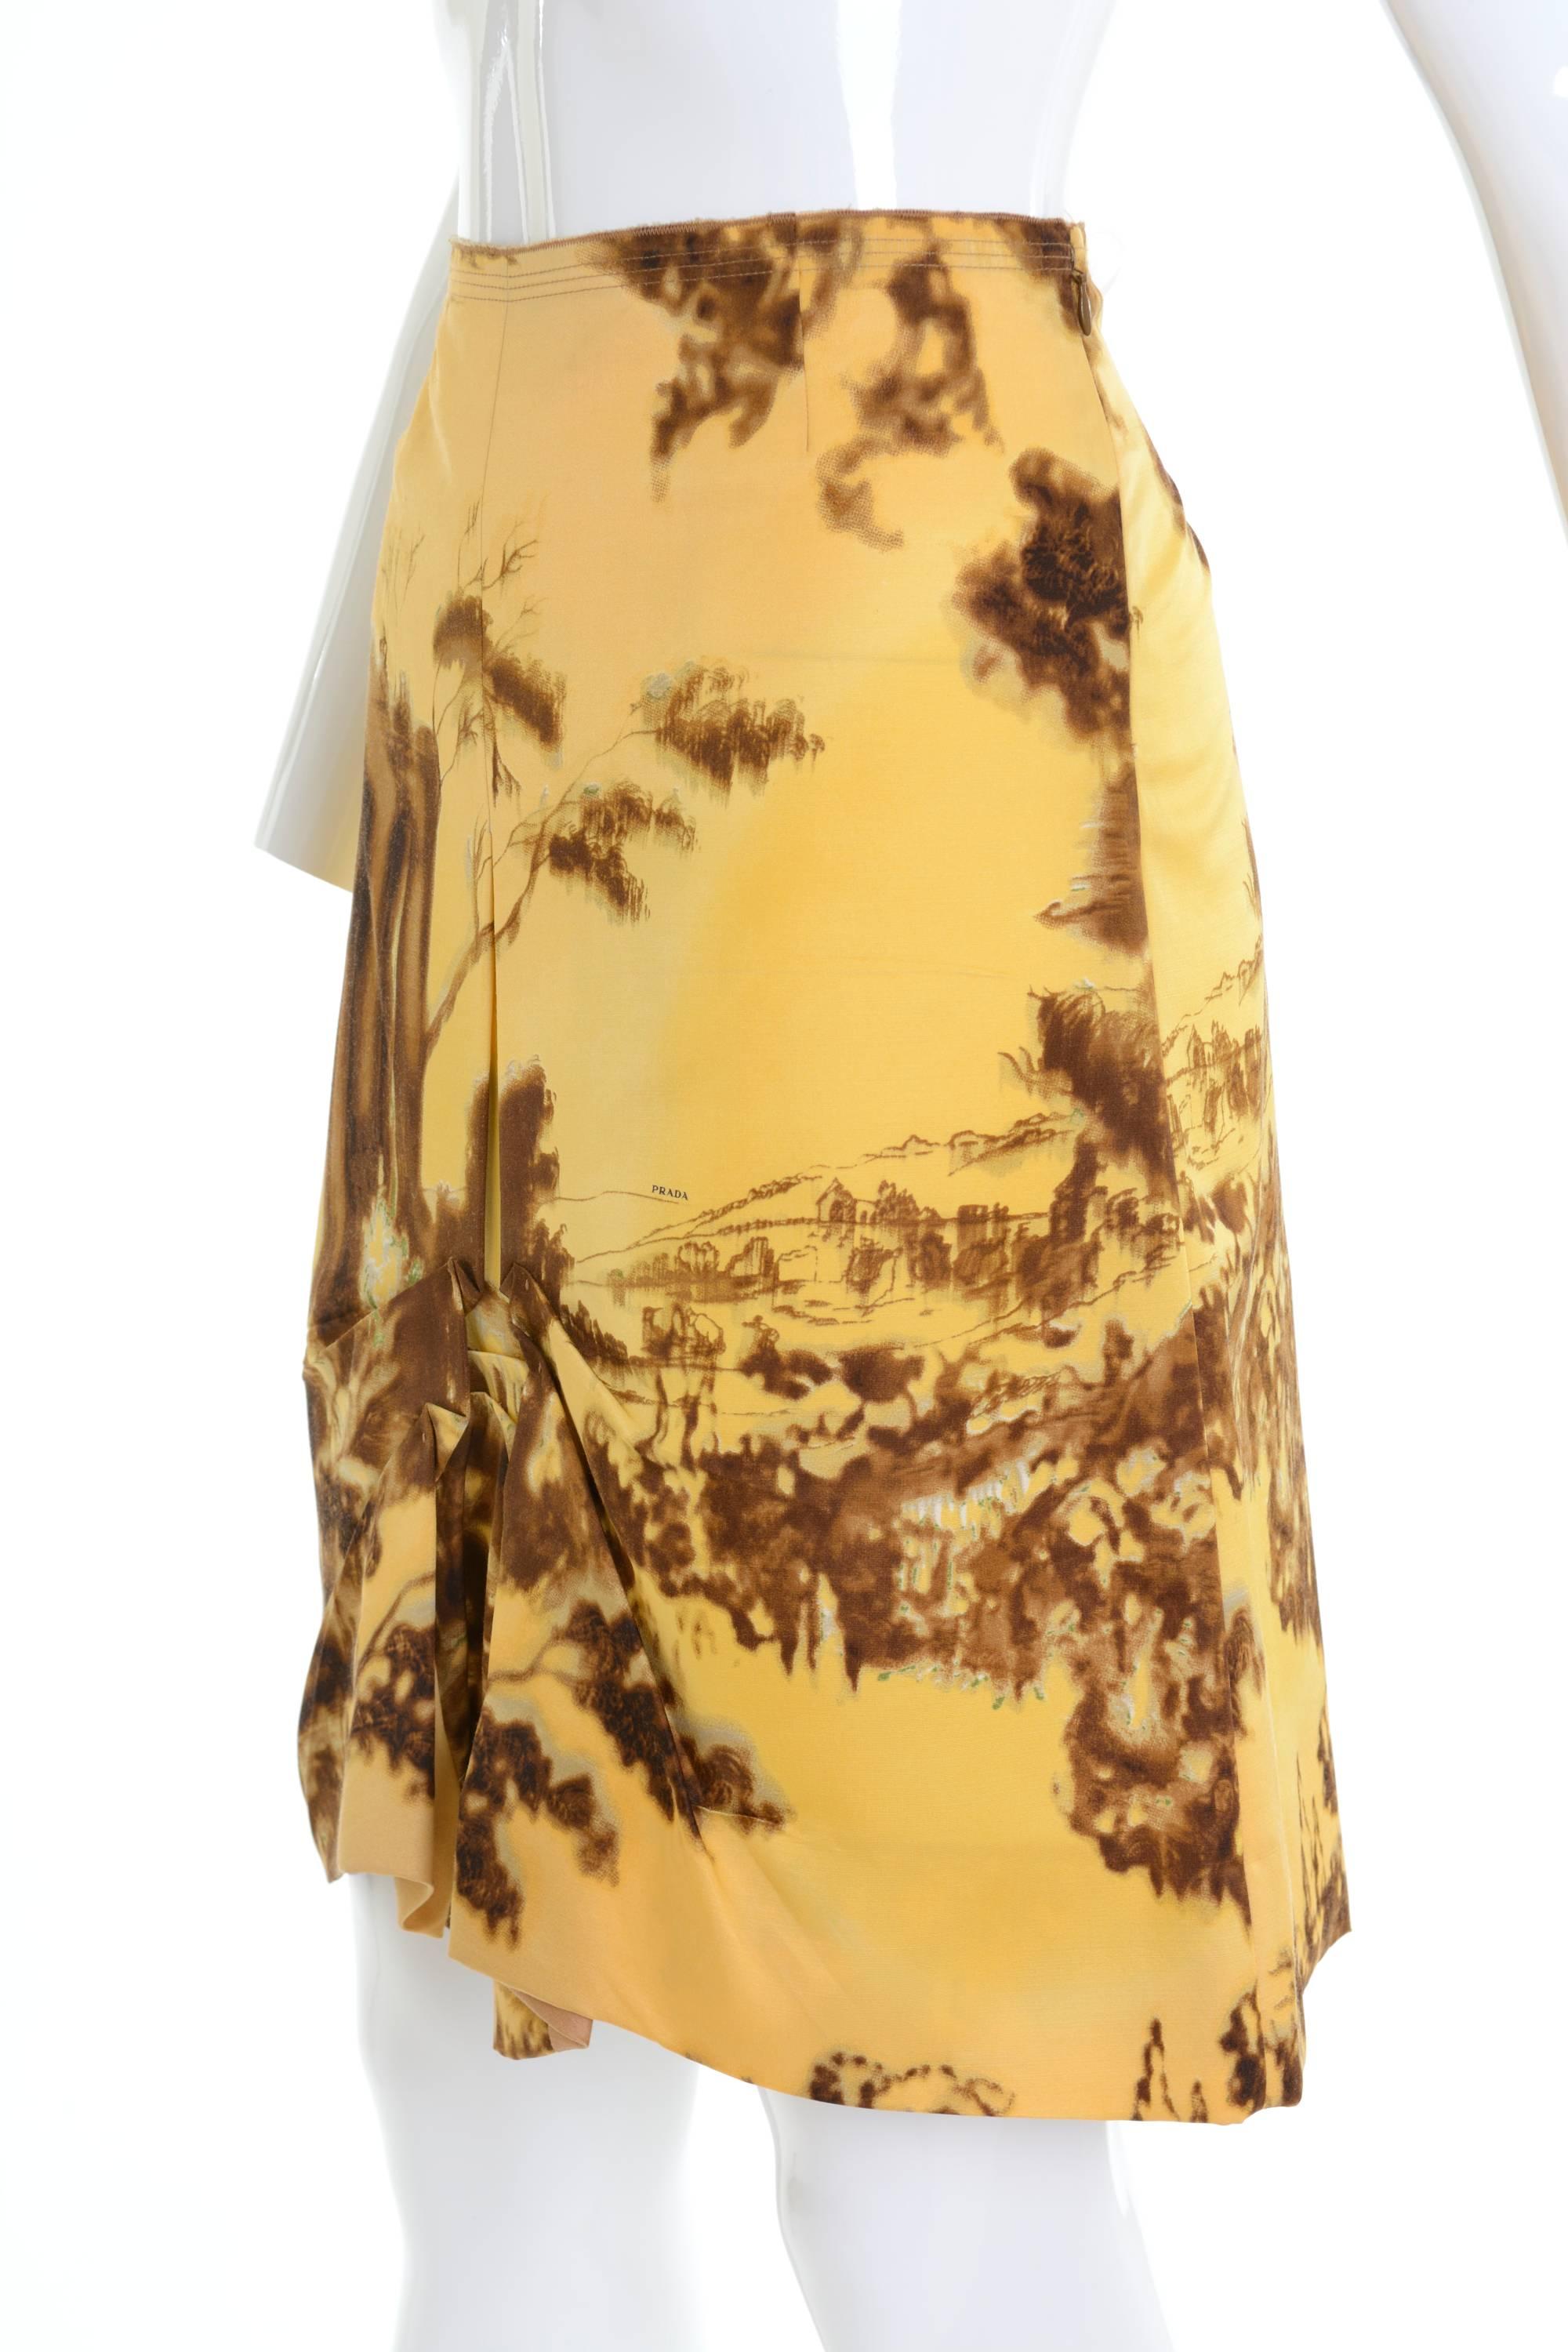 This lovely Prada skirt is in a golden yellow and brown landscape like painting print silk and wool fabric. It has A line and side zip closure.

Excellent vintage condition

Label: Prada - Made in Italy
Fabric:  silk/wool
Color: golden